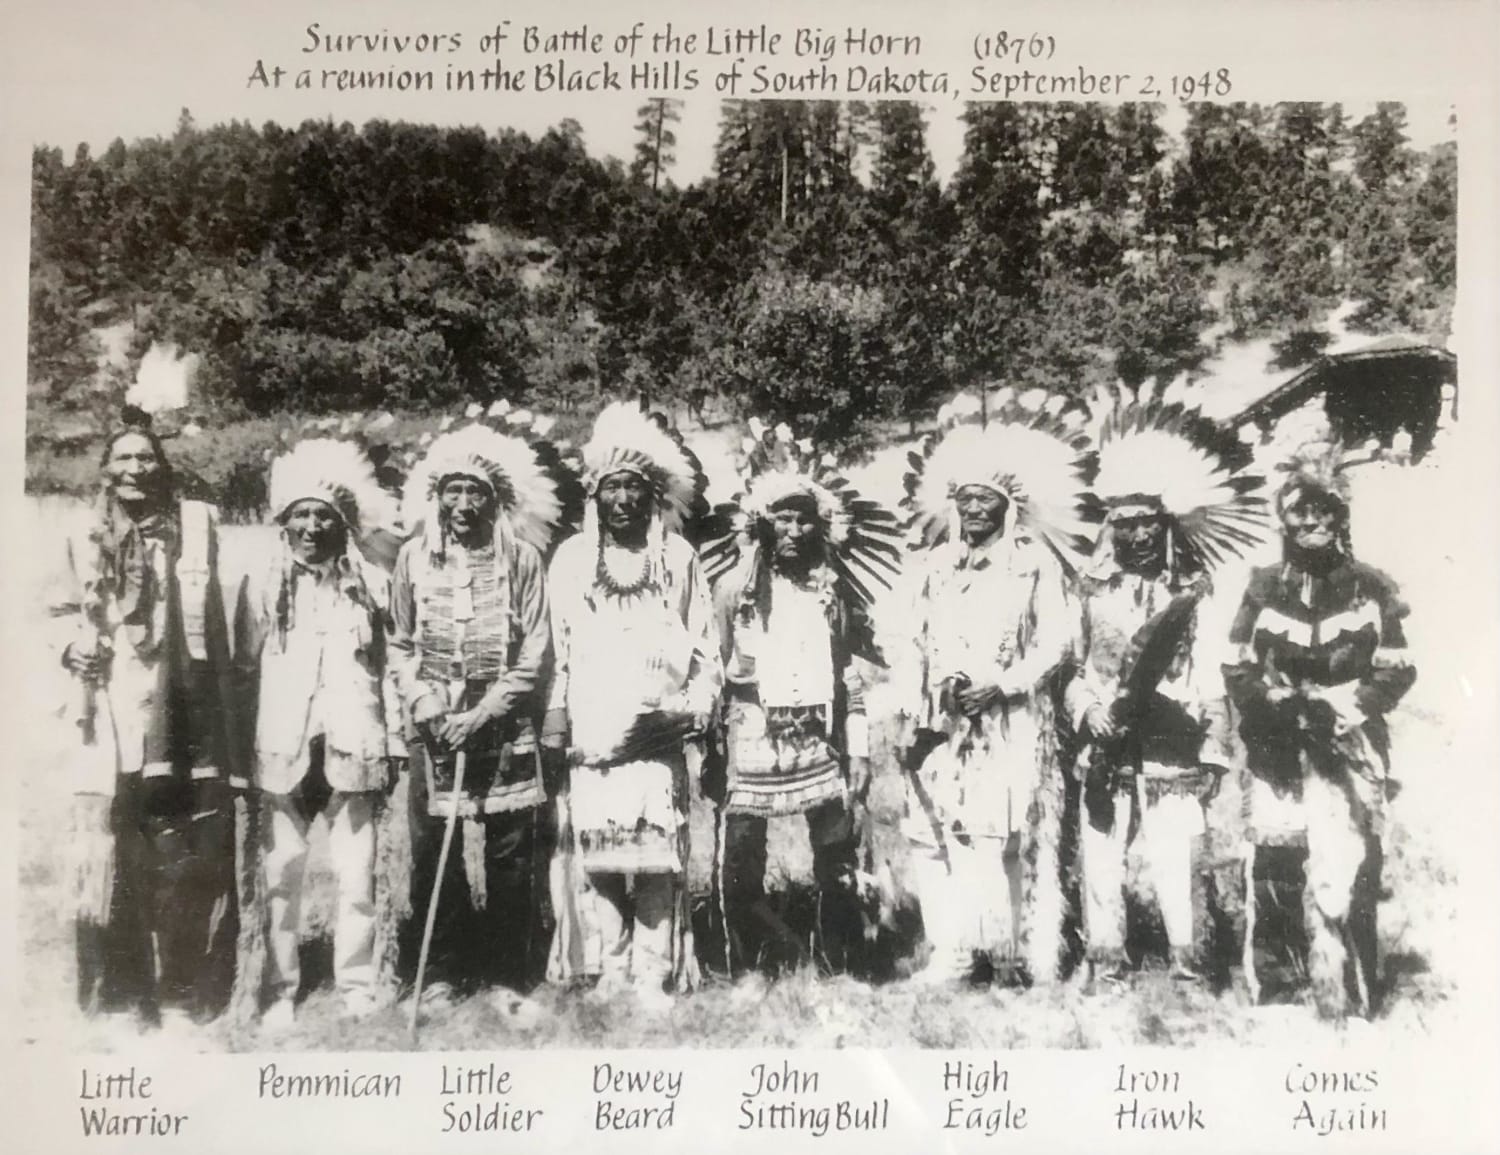 Survivors of Battle of the Little Bighorn at a reunion in the Black Hills of South Dakota, September 2nd, 1948